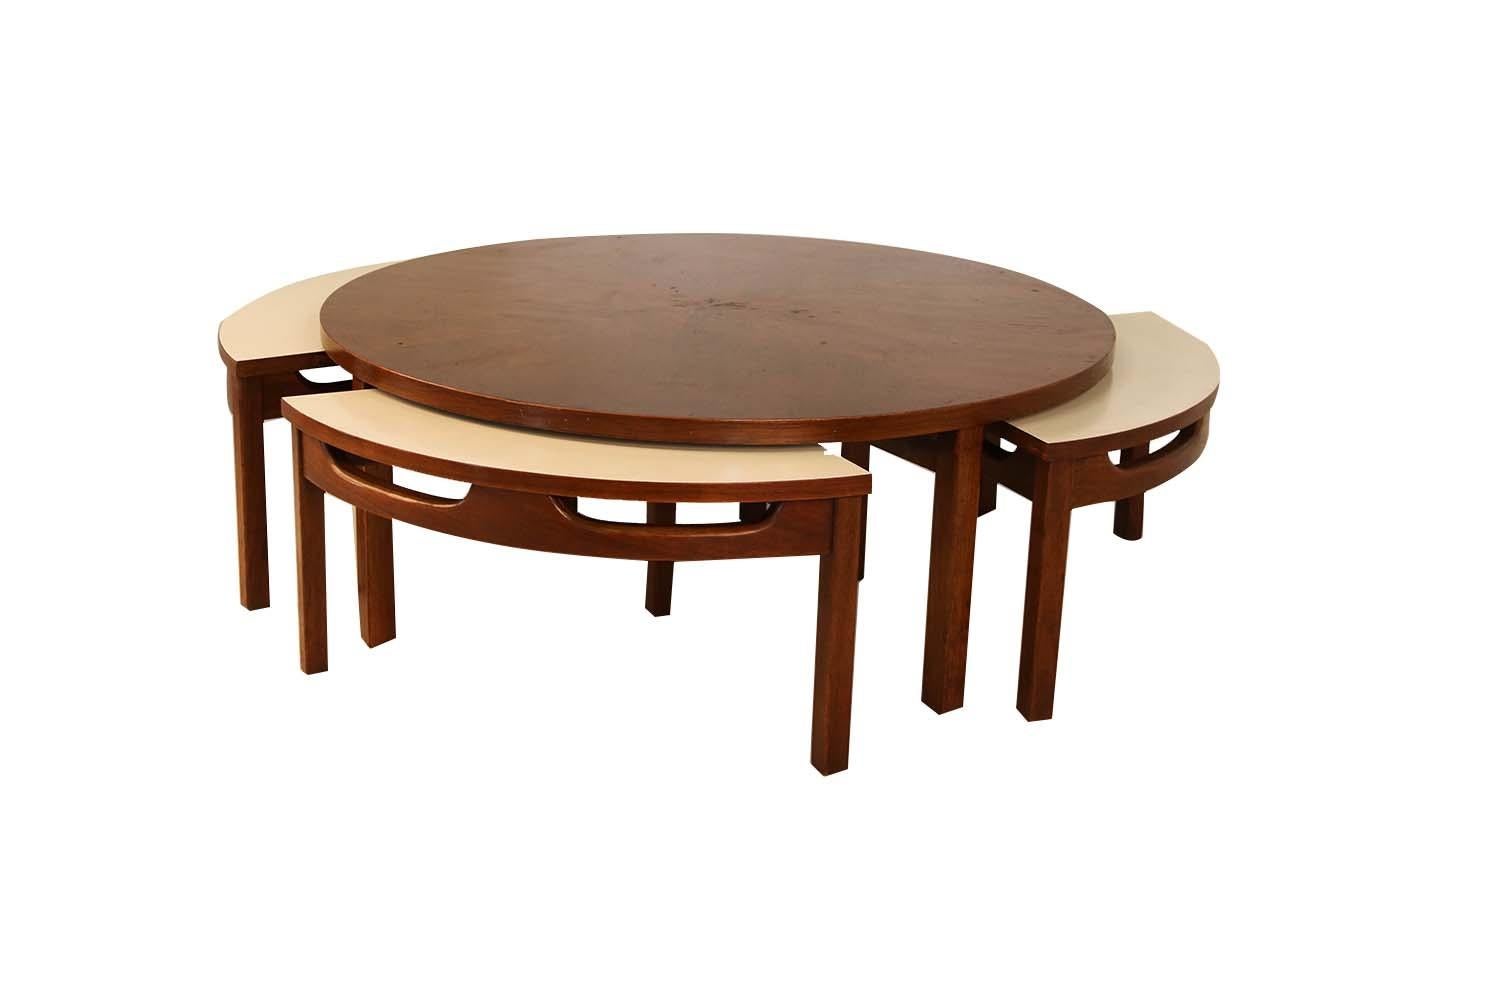 This impressive Mid-Century Modern walnut round coffee table includes four white laminate/walnut nesting tables. This rare coffee table features a book-matched heartwood walnut veneer top resting on four strong angular walnut legs. The four pie